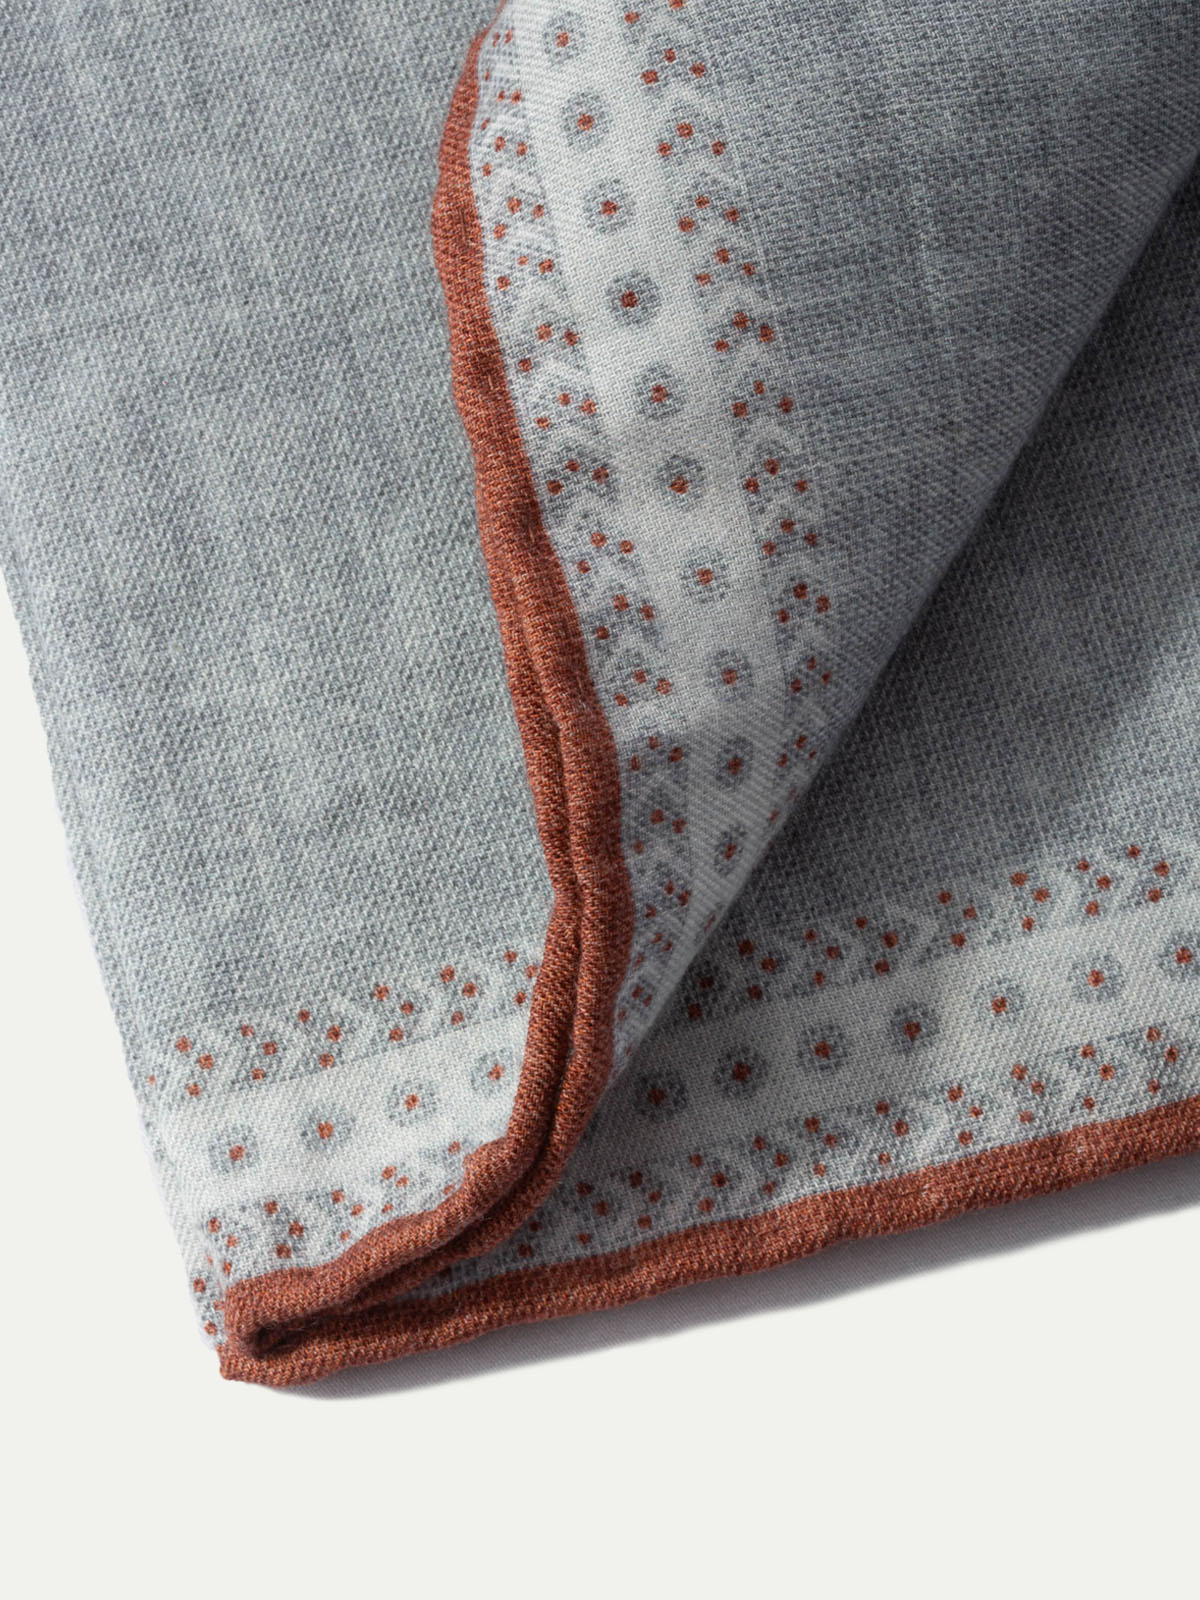 Grey fancy pocket square - Made in Italy